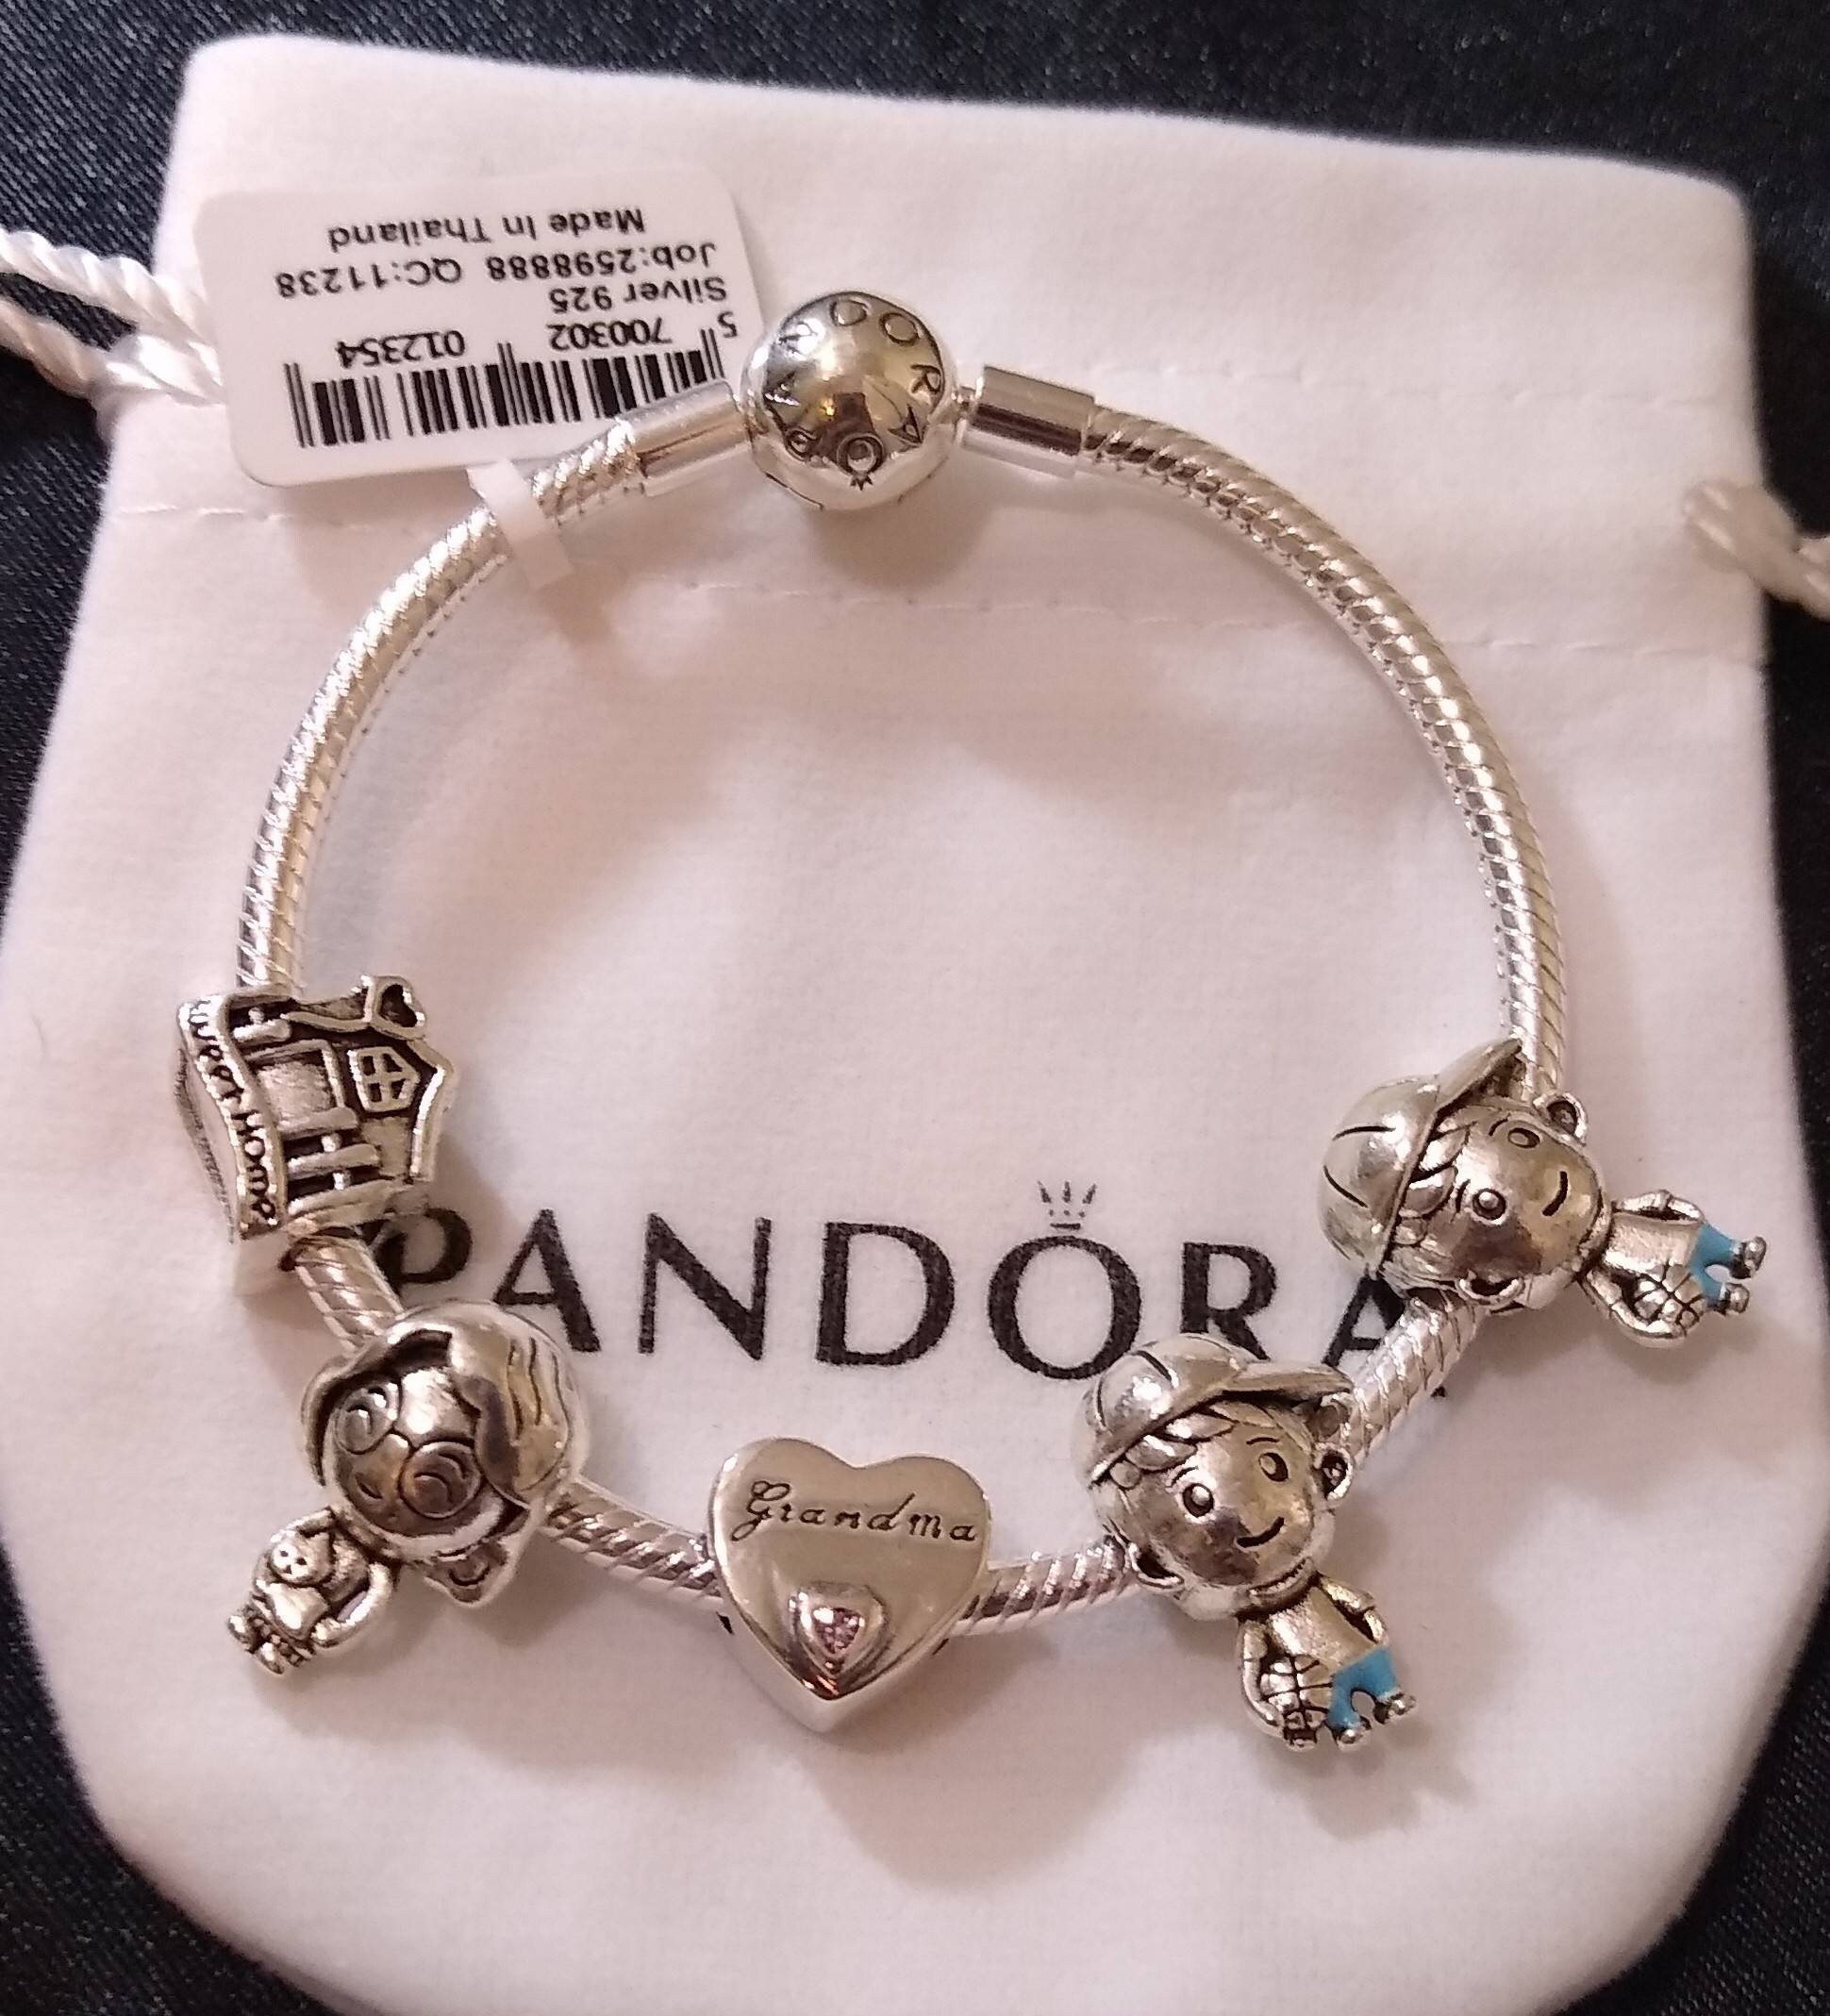 Buy Pandora Bracelet With and Grandsons Themed Charms in India - Etsy